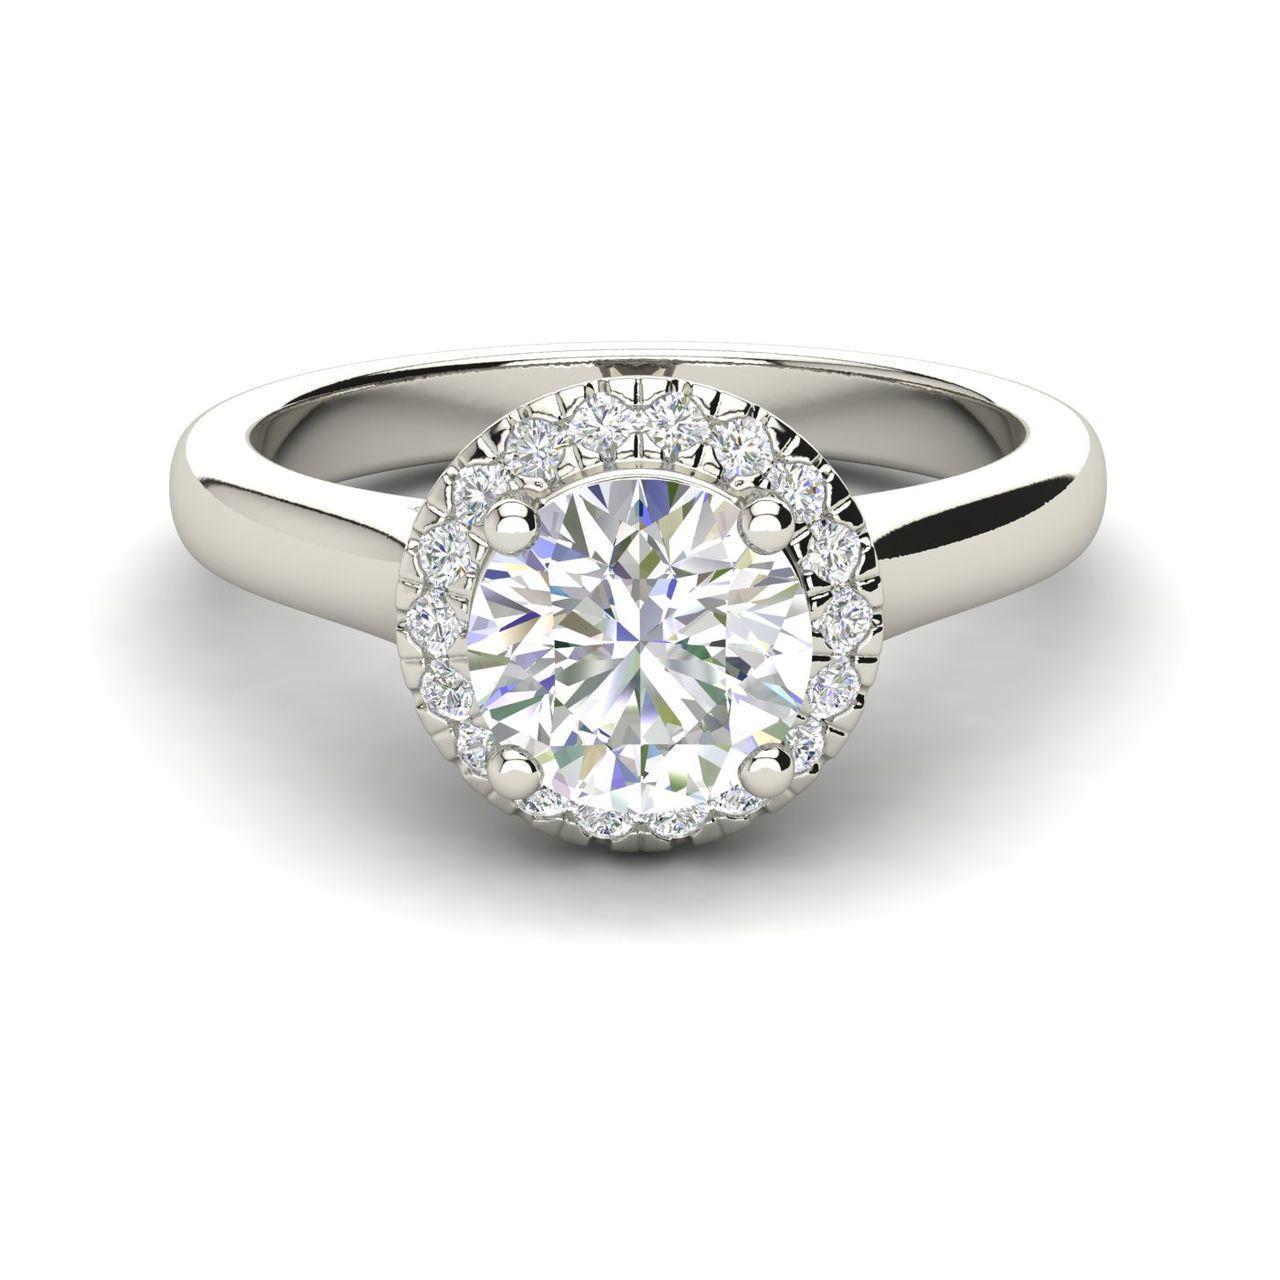 Halo Solitaire 3.4 Carat SI1/F Round Cut Diamond Engagement Ring White